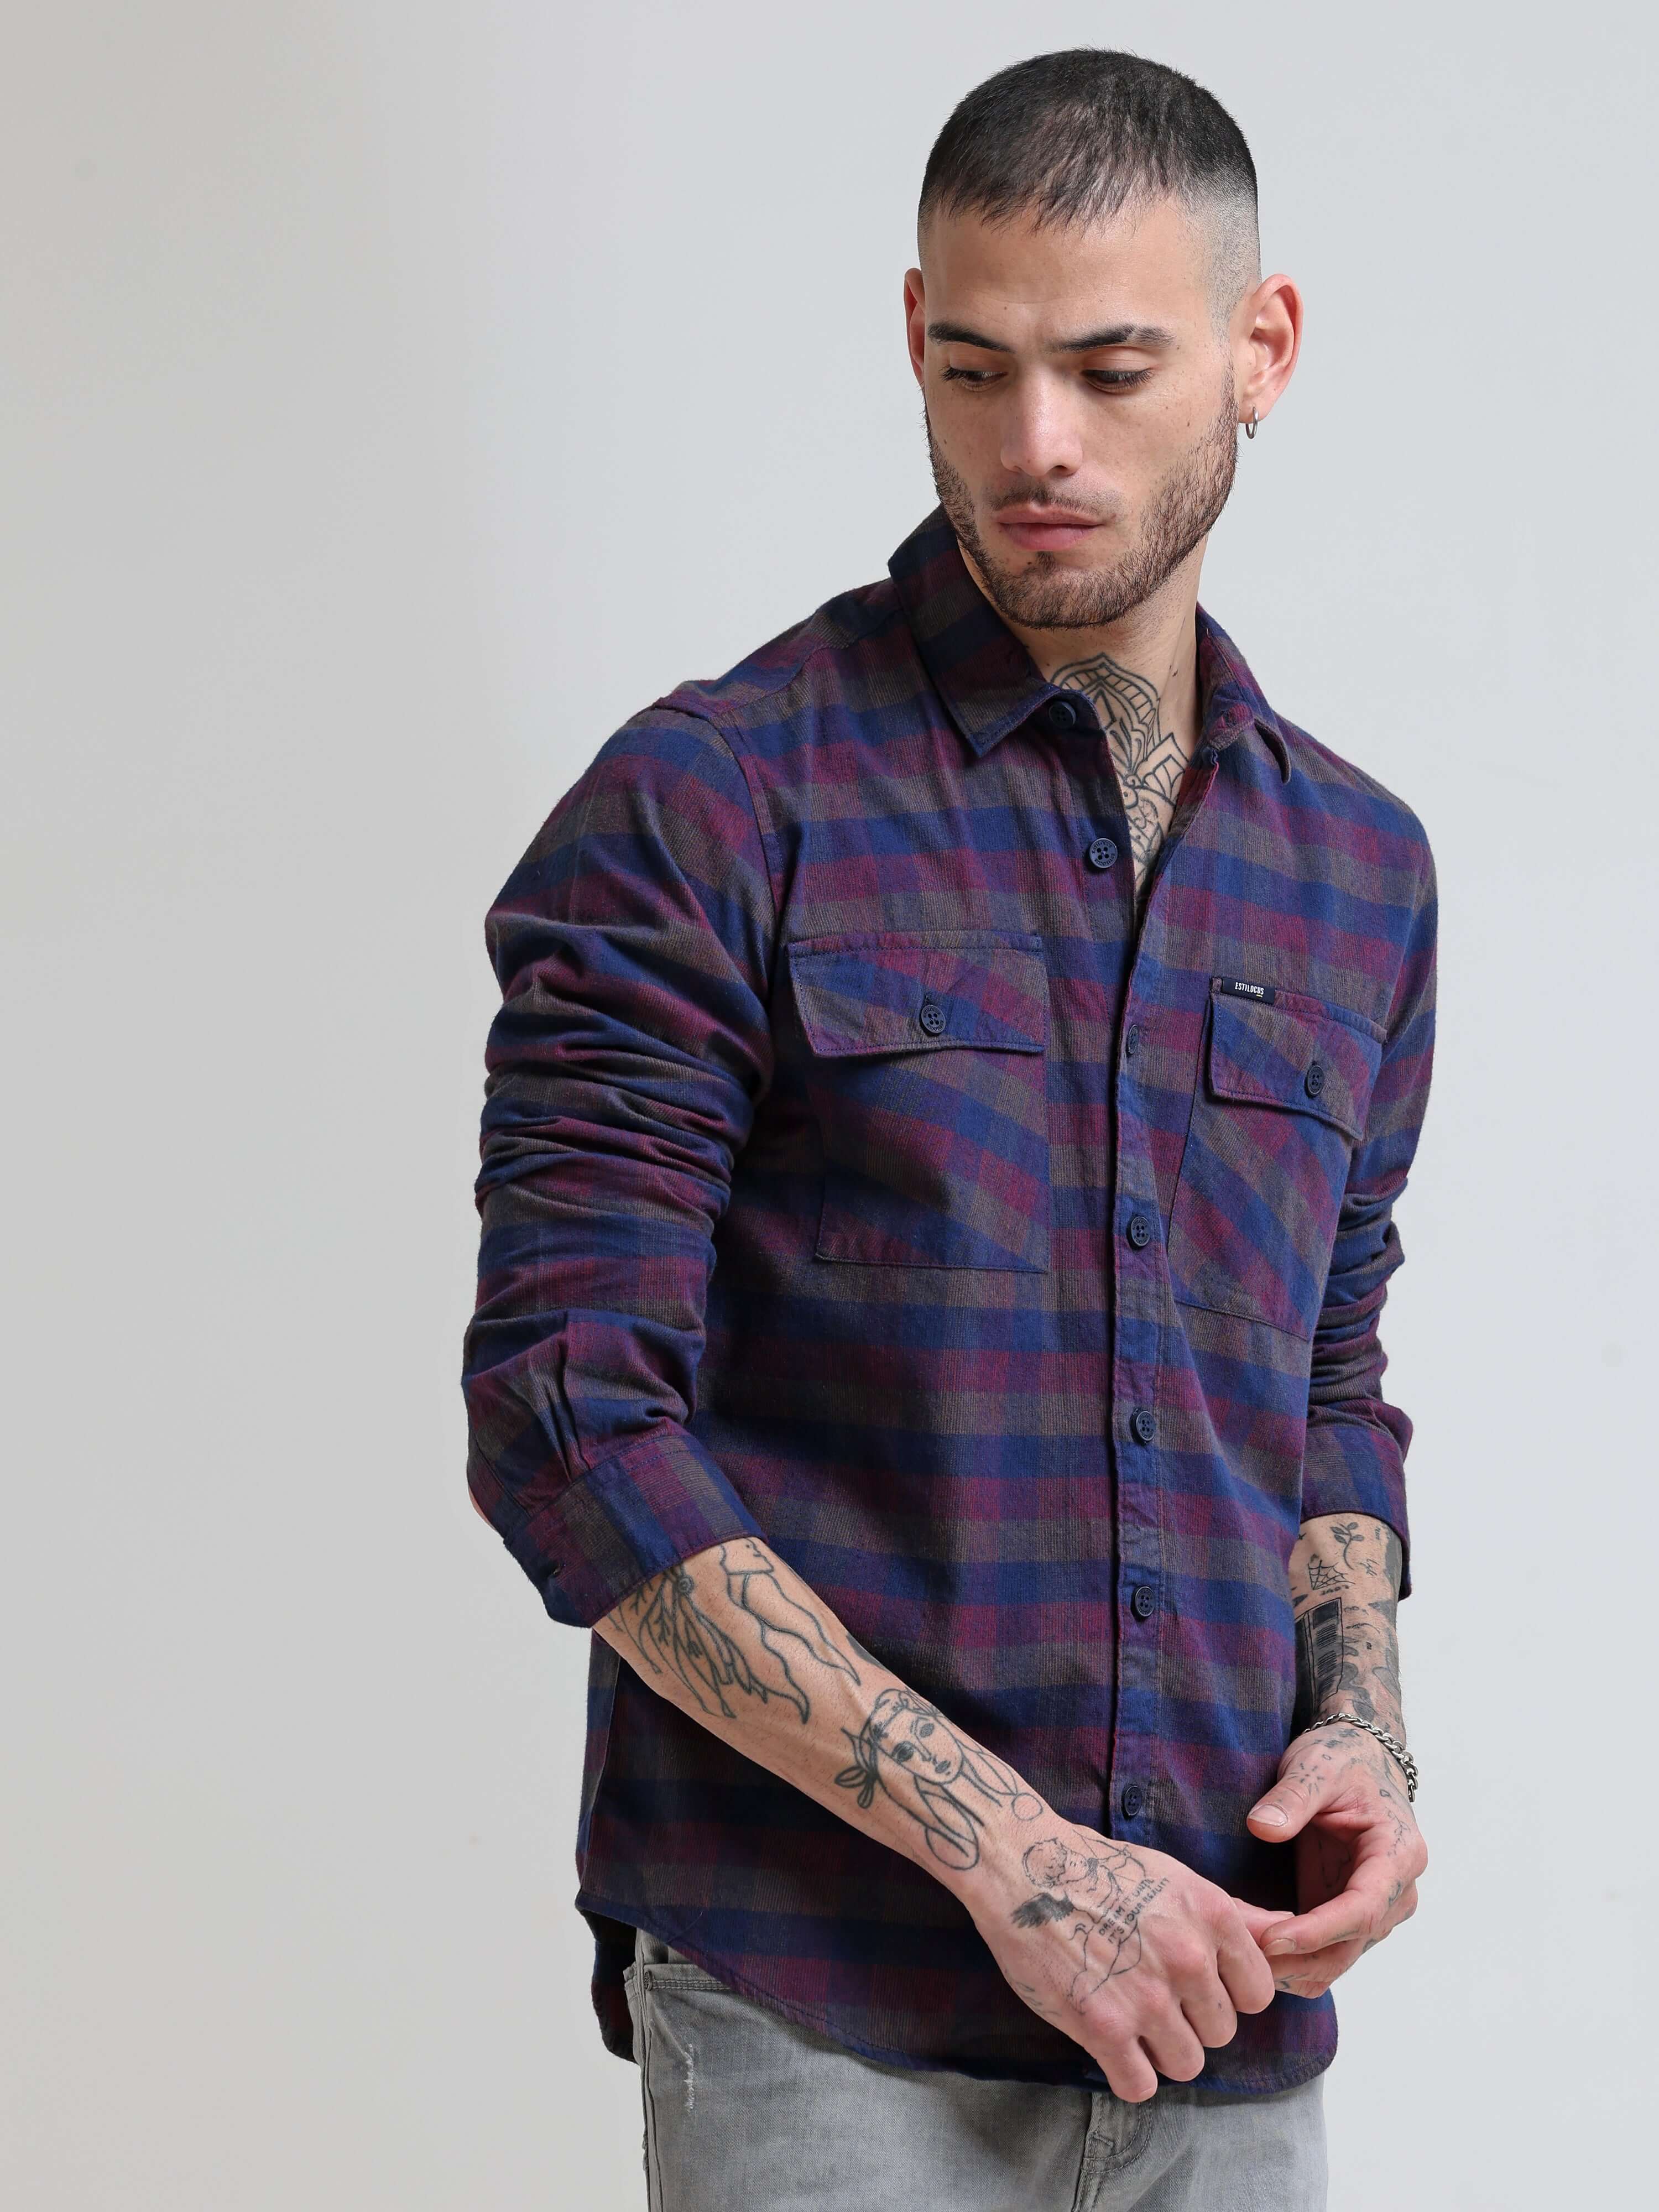 Burgundy Corduroy Check Shirt shop online at Estilocus. Step into refined style with our Burgundy Corduroy Comfort Fit Casual Shirt. This timeless piece boasts double pockets with button flaps, fusing luxurious corduroy with modern design for urban sophis